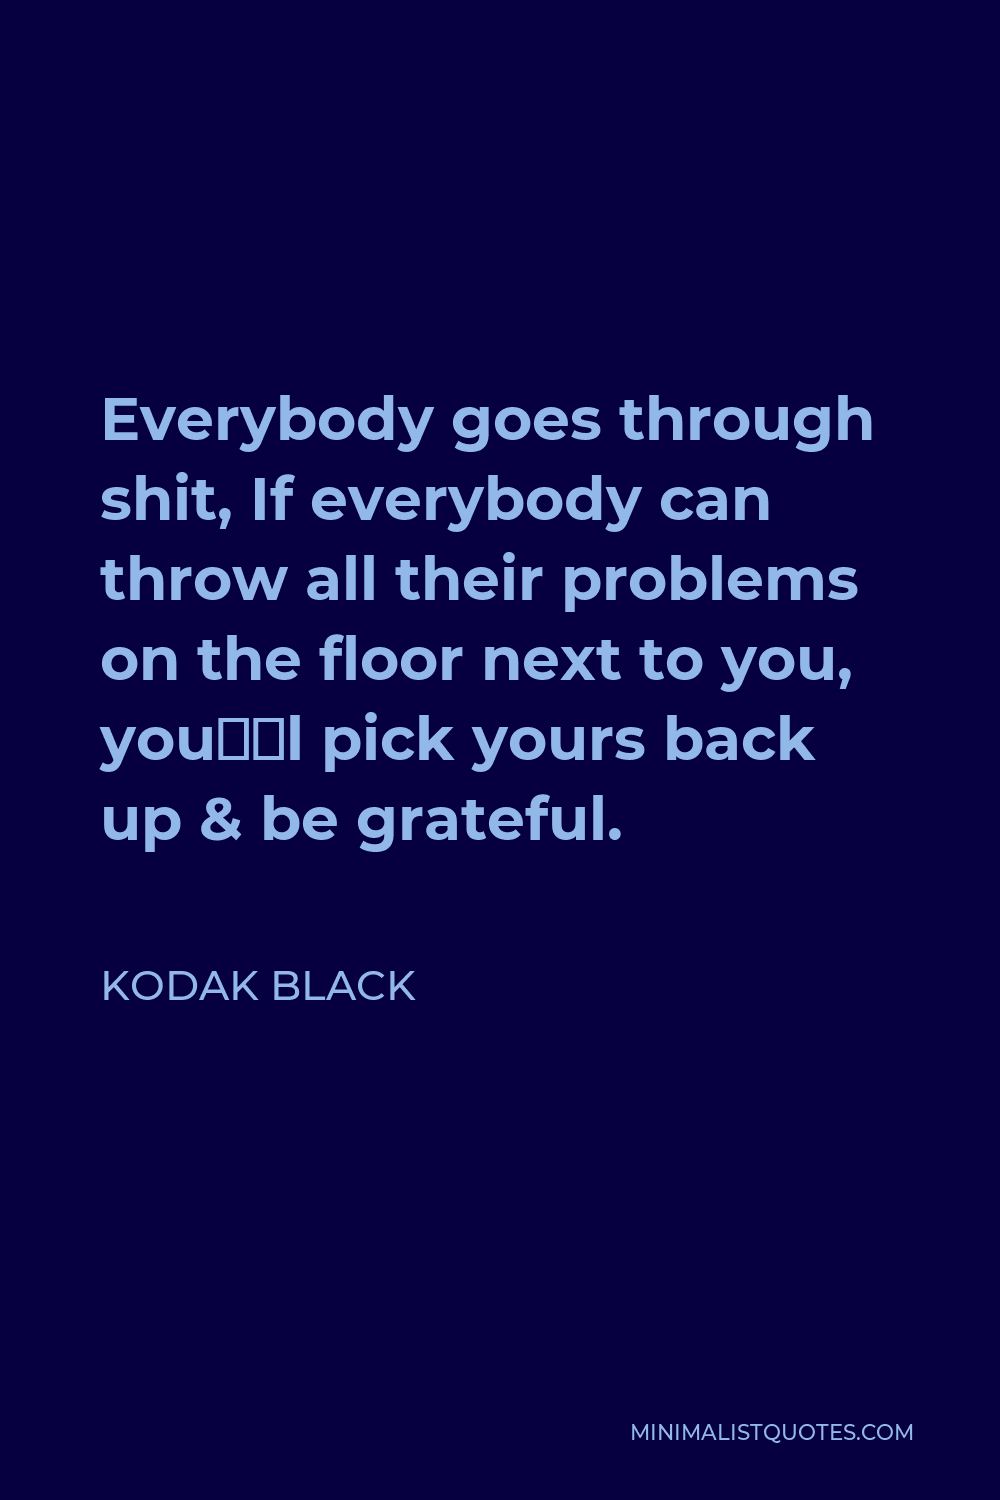 Kodak Black Quote - Everybody goes through shit, If everybody can throw all their problems on the floor next to you, you’ll pick yours back up & be grateful.